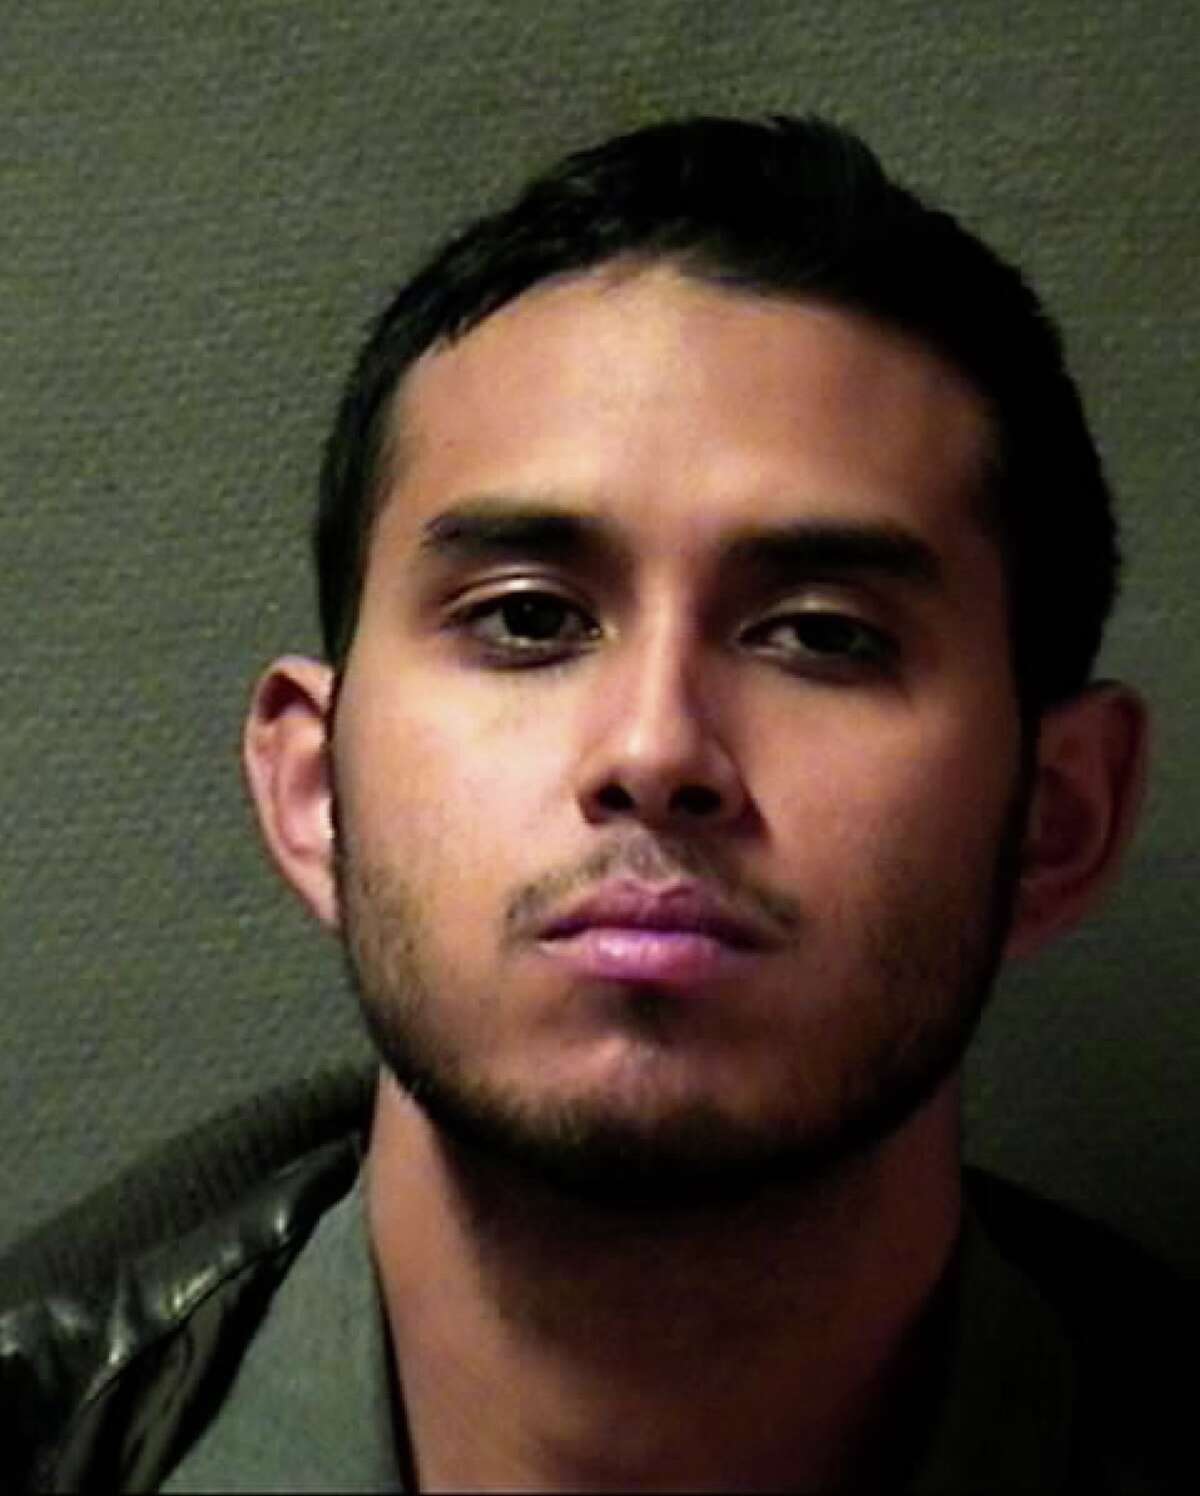 Michael Anthony Reyes Wanted for sexual assault Height: 5 feet, 5 inches Weight: 125 pounds Brown eyes, black hair Last known location: Houston Anyone with information about this fugitive is urged to call Houston Crime Stoppers at 713-222-TIPS (8477)